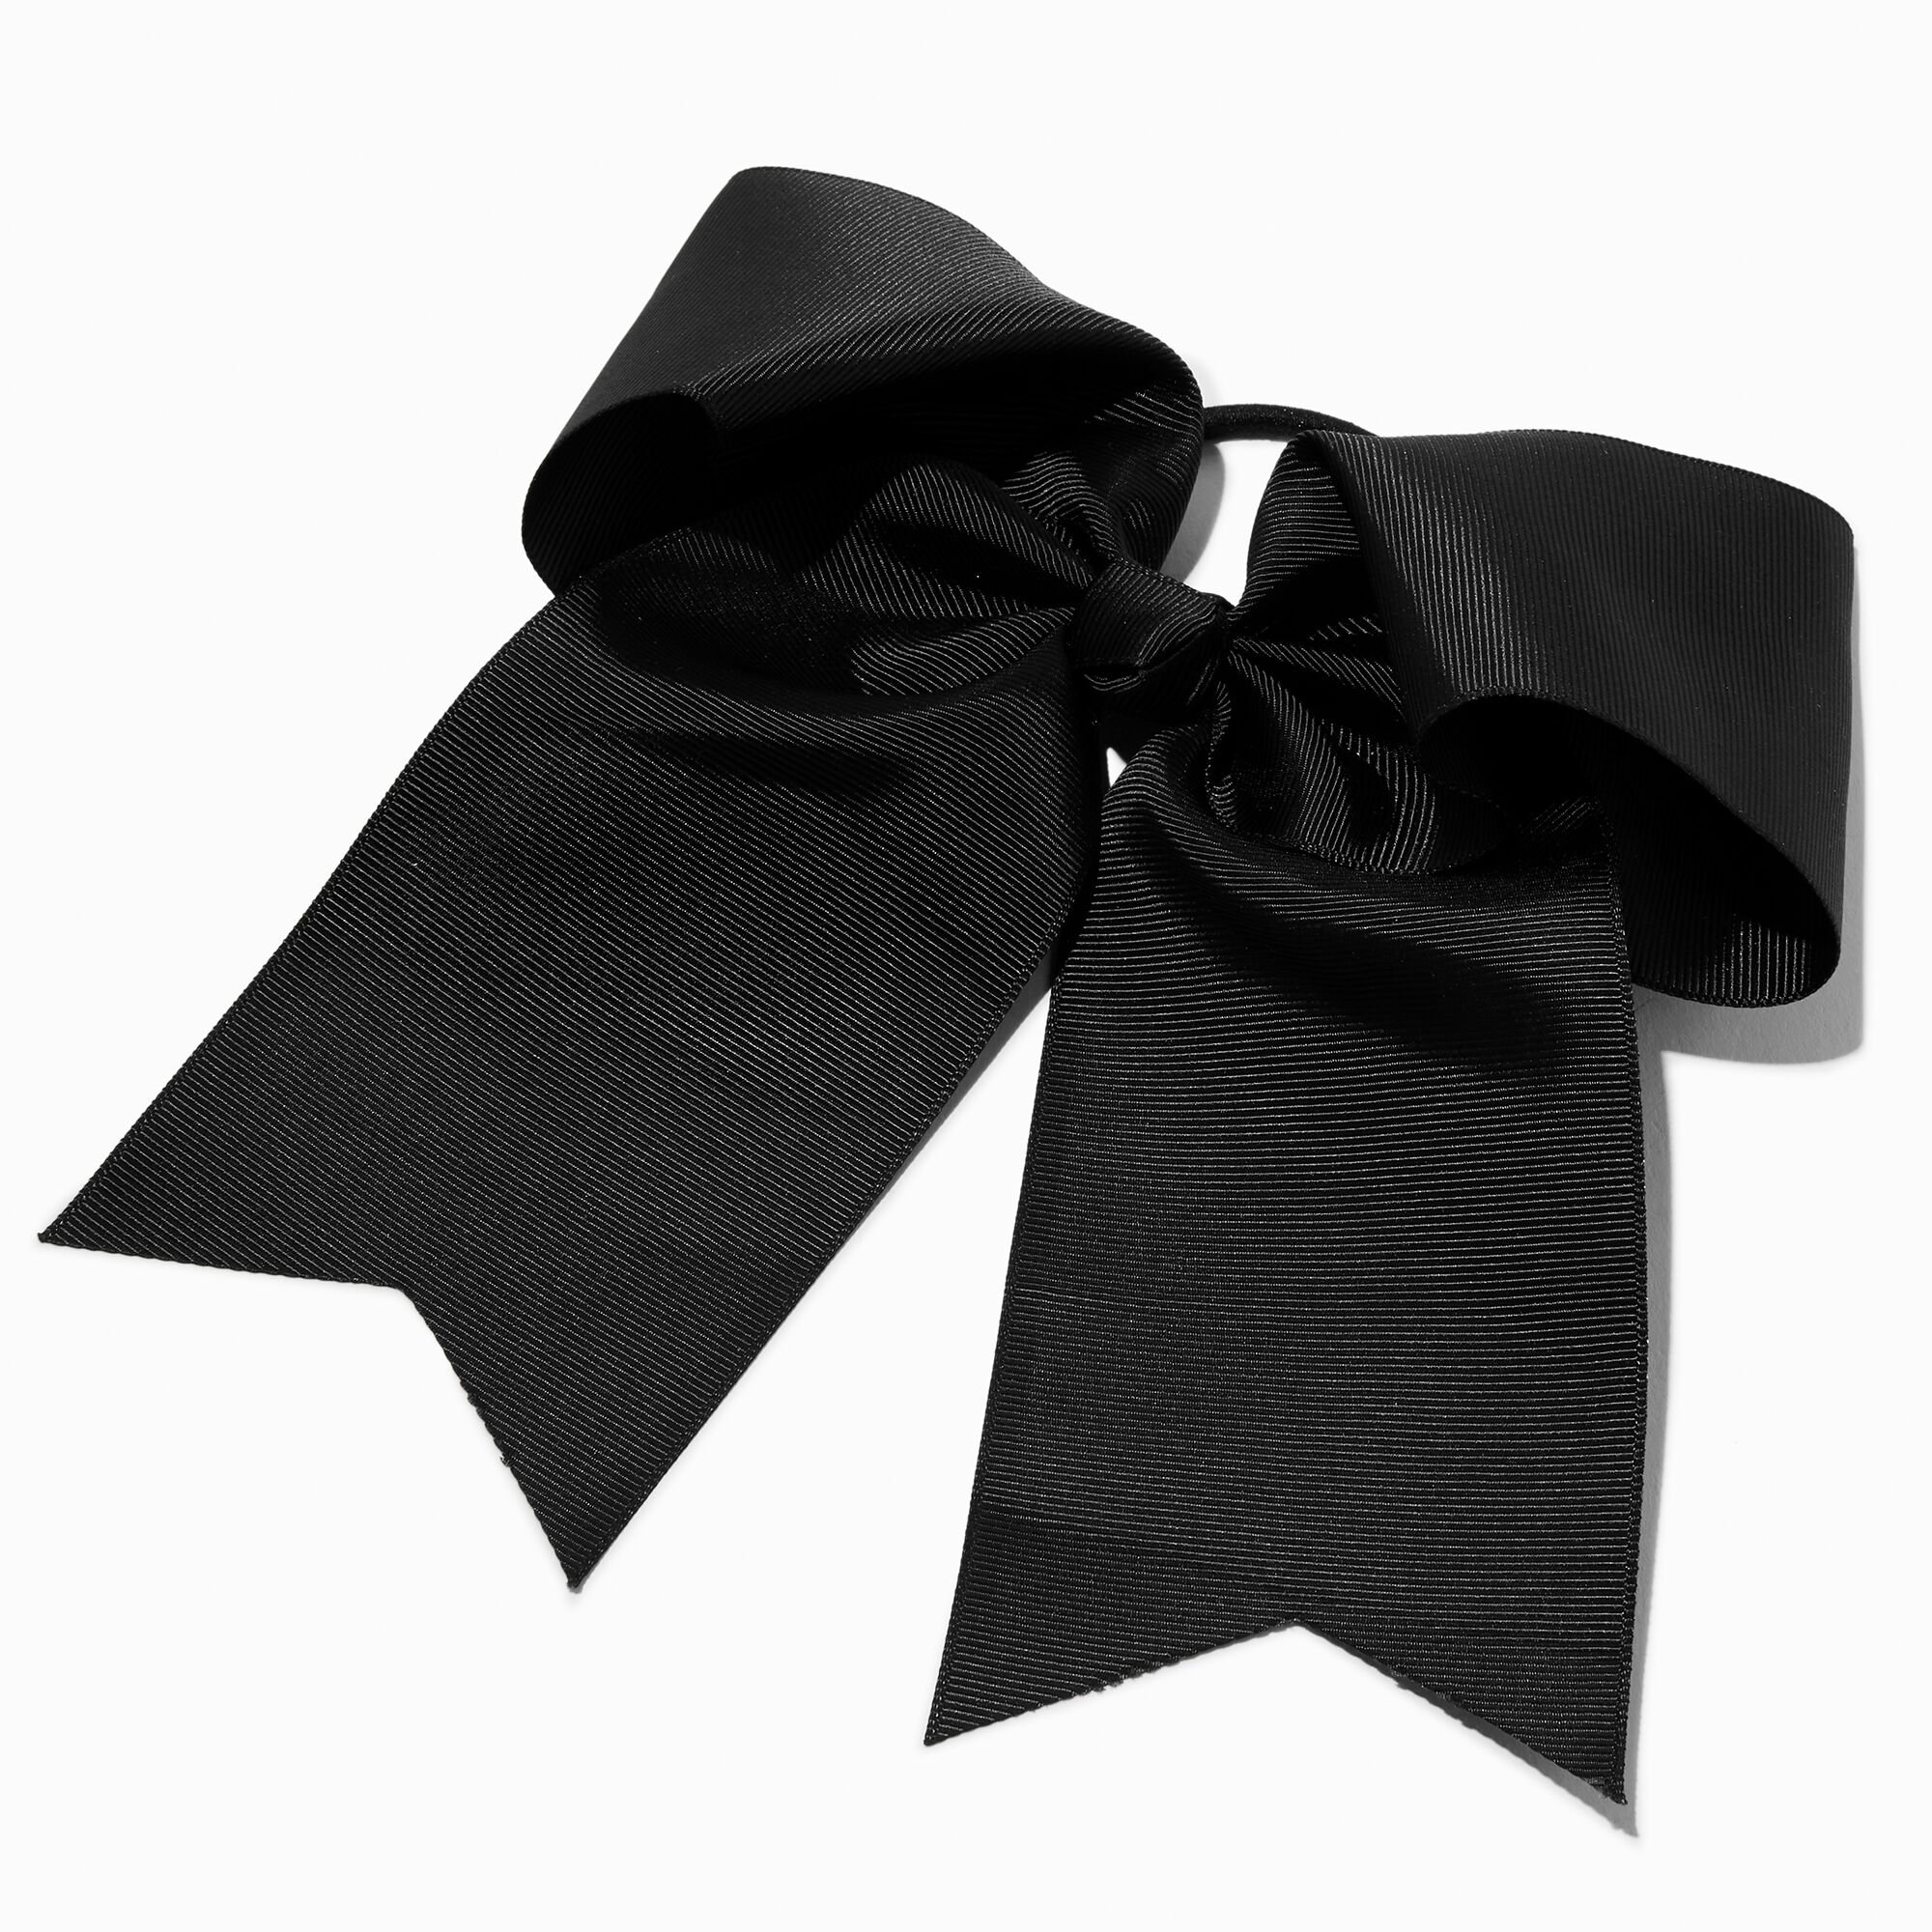 View Claires Large Bow Hair Tie Black information